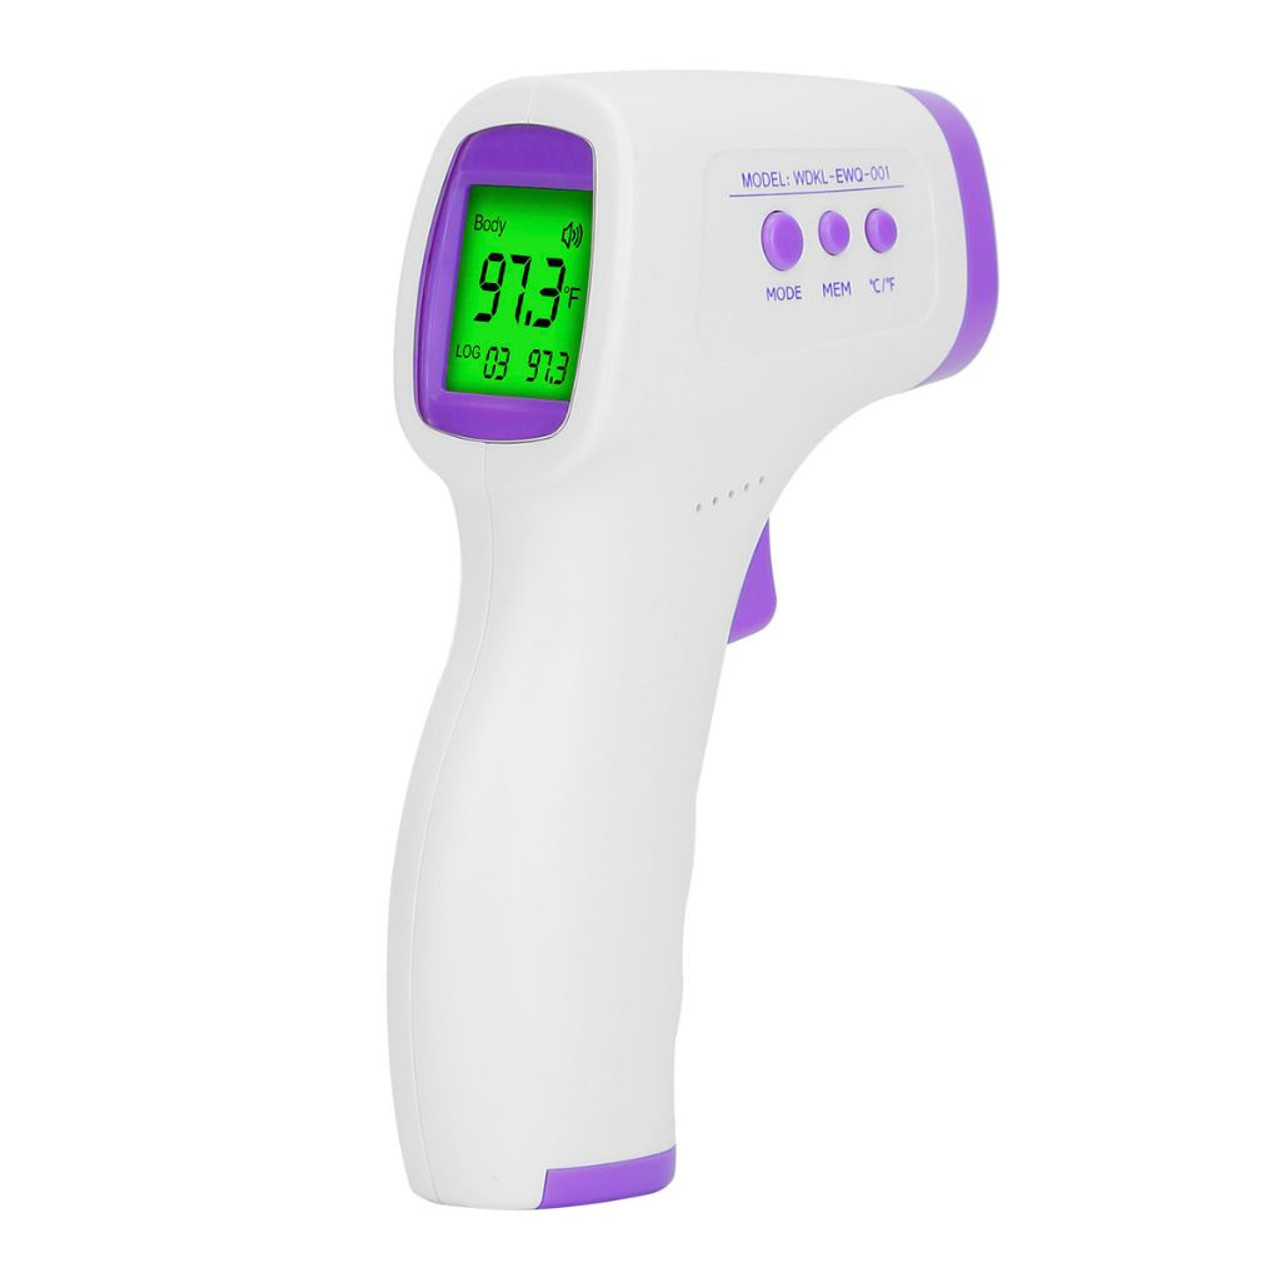 iMounTEK® Digital Infrared Thermometer product image